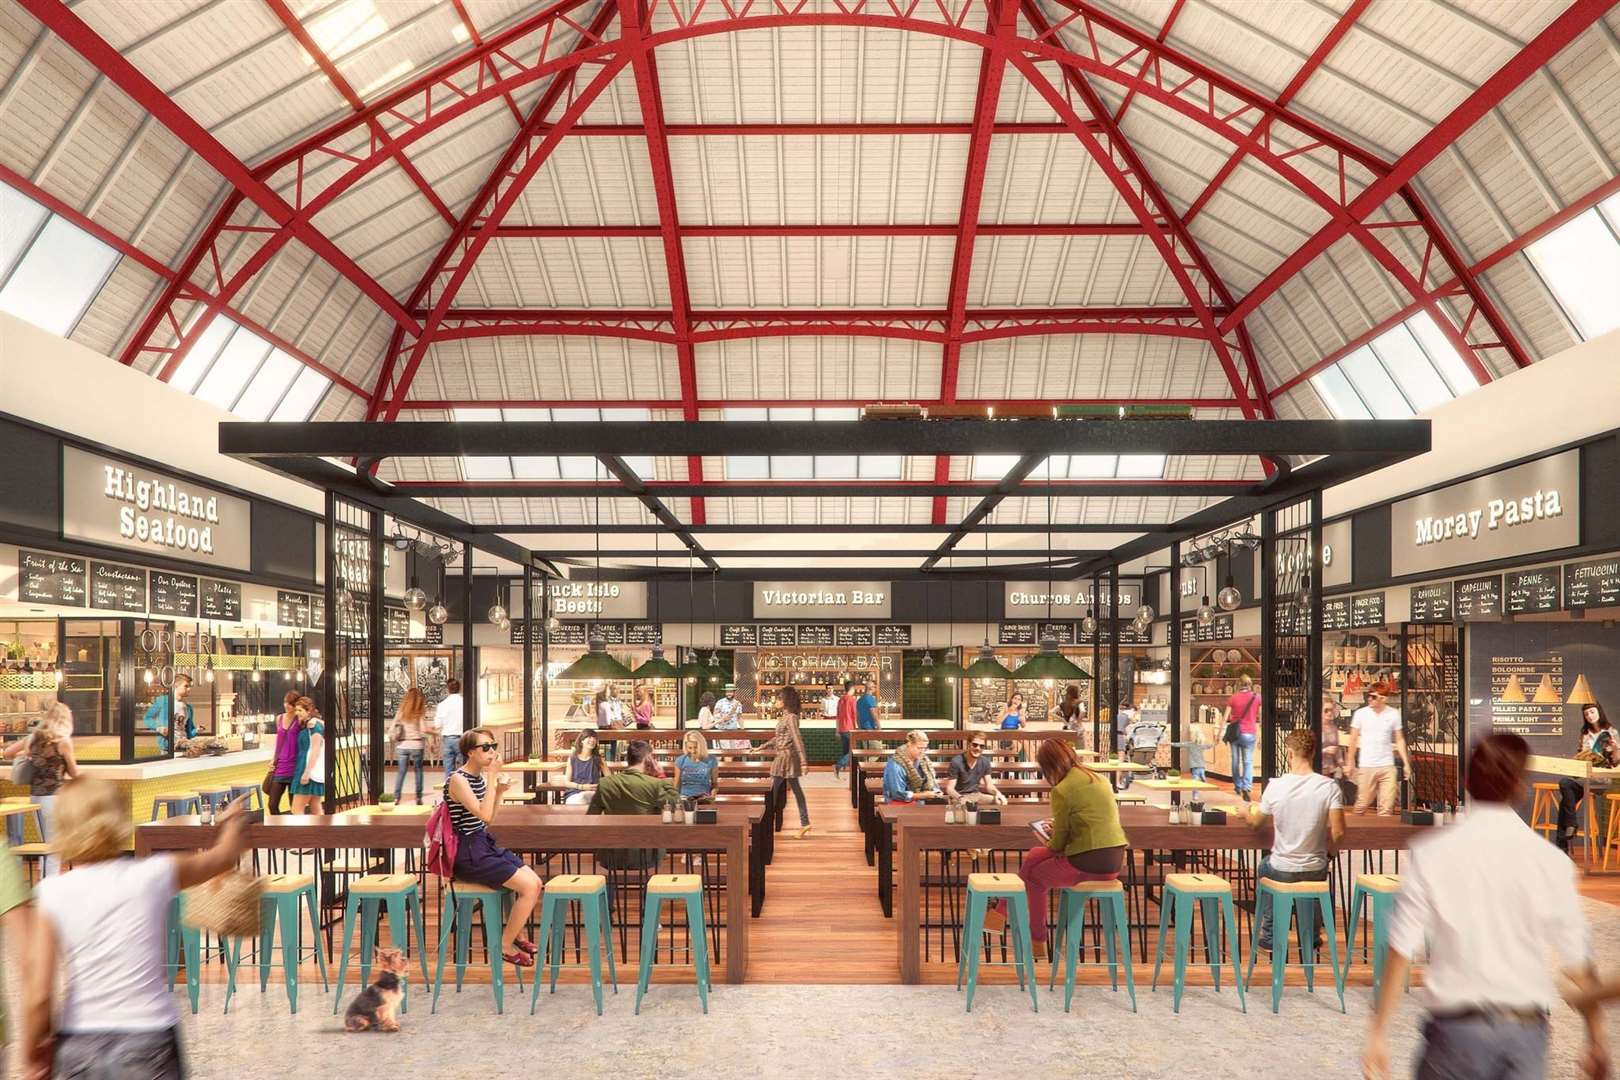 The revamped Victorian Market 'should be a great addition to the city centre'.